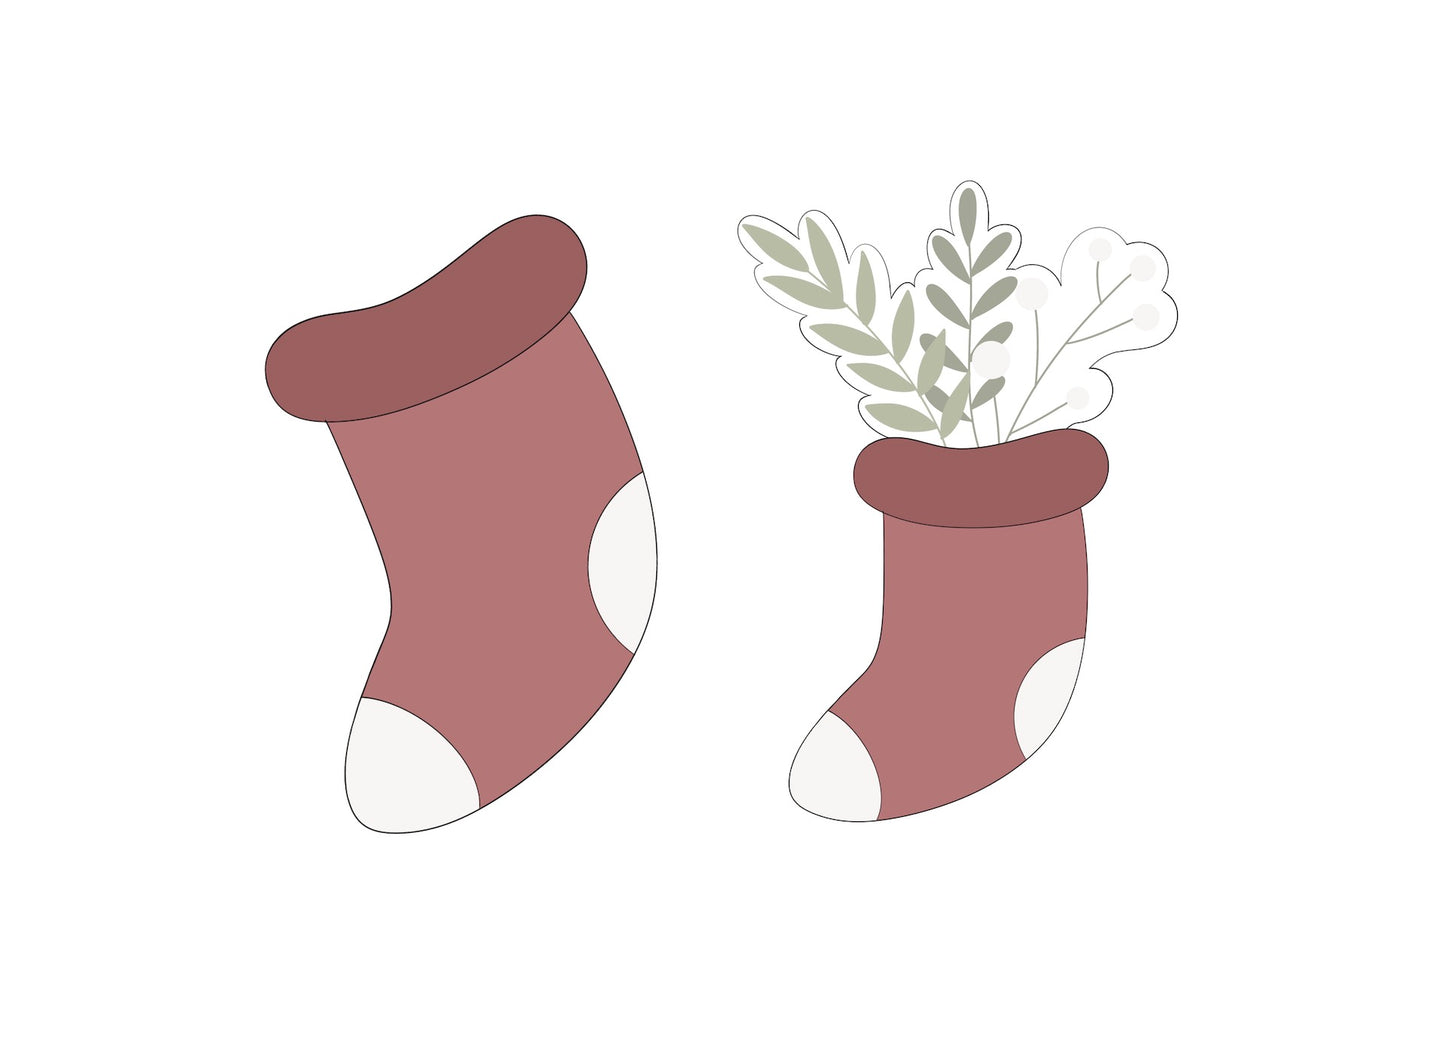 Stocking 3 with or without Greenery Cookie Cutters